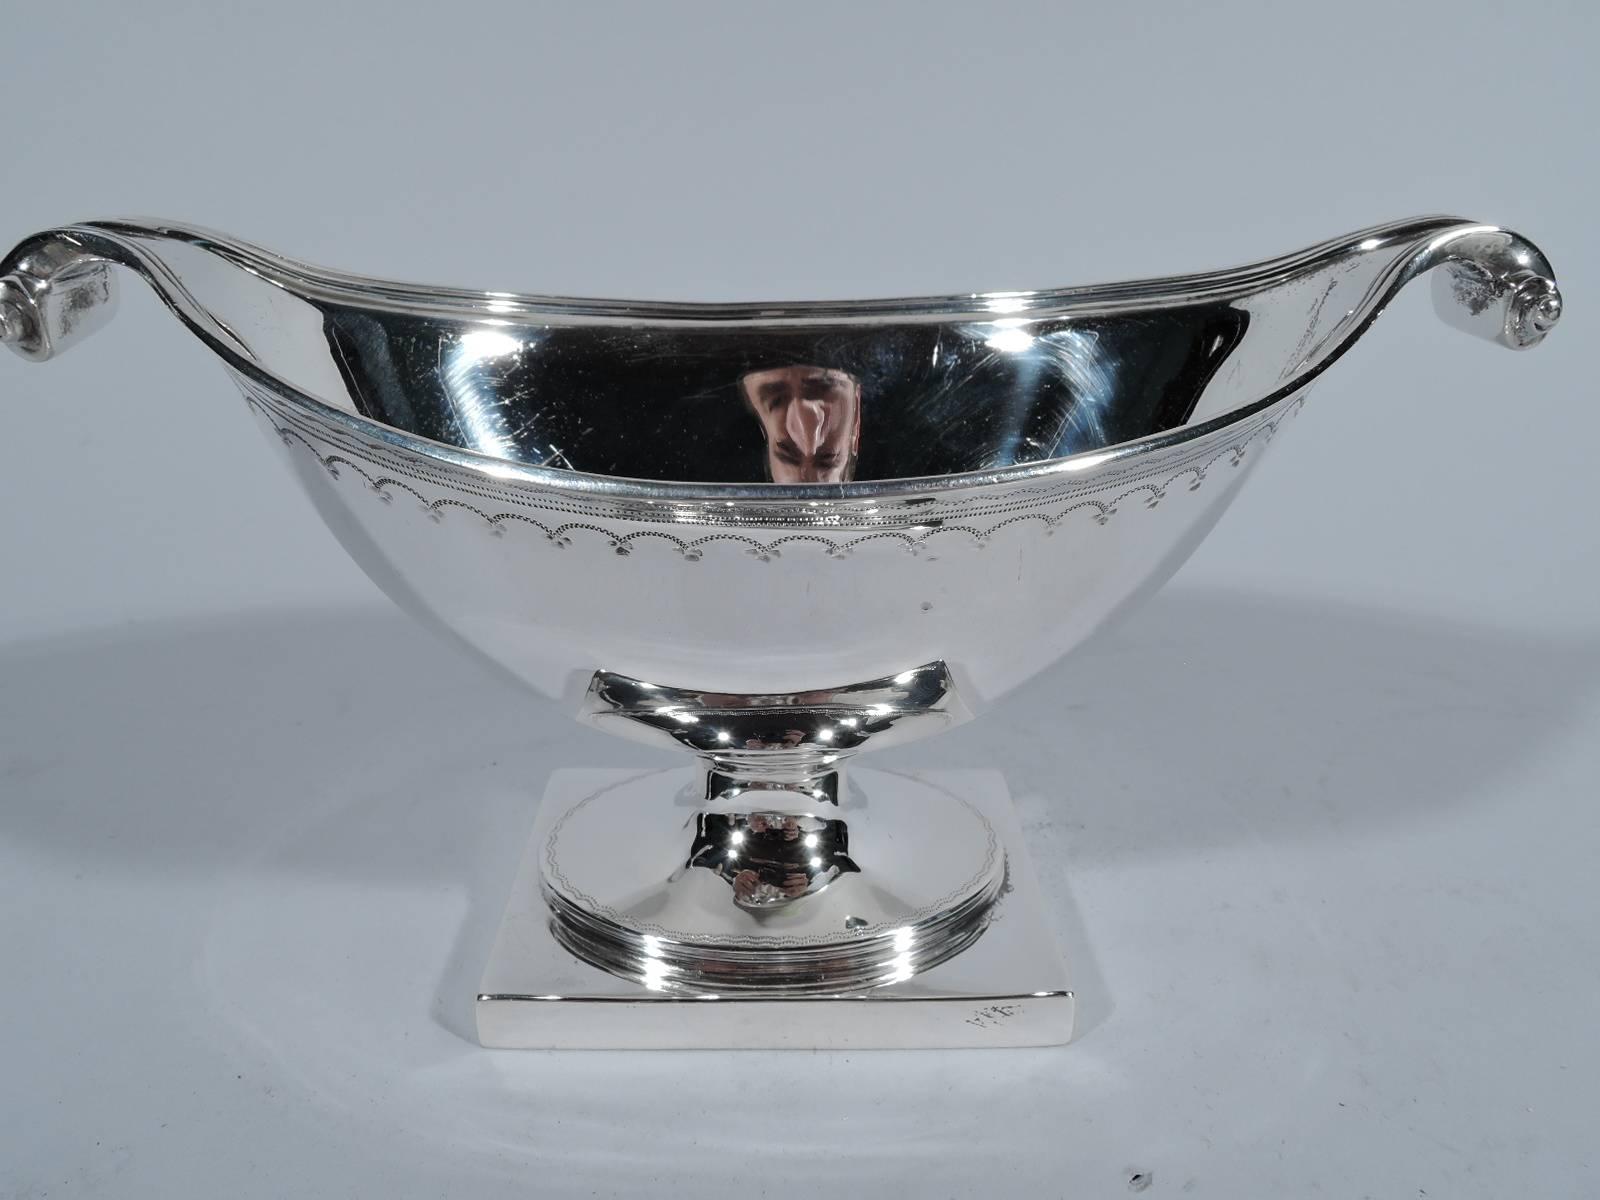 Pair of neoclassical sterling silver sweet meat bowls. Made by Howard & Co. in New York, circa 1910. Each: Boat-form bowl with volute scrolls on oval foot mounted to rectangular base. Engraved bands of lines, arches, and waves. Reeded bowl and foot